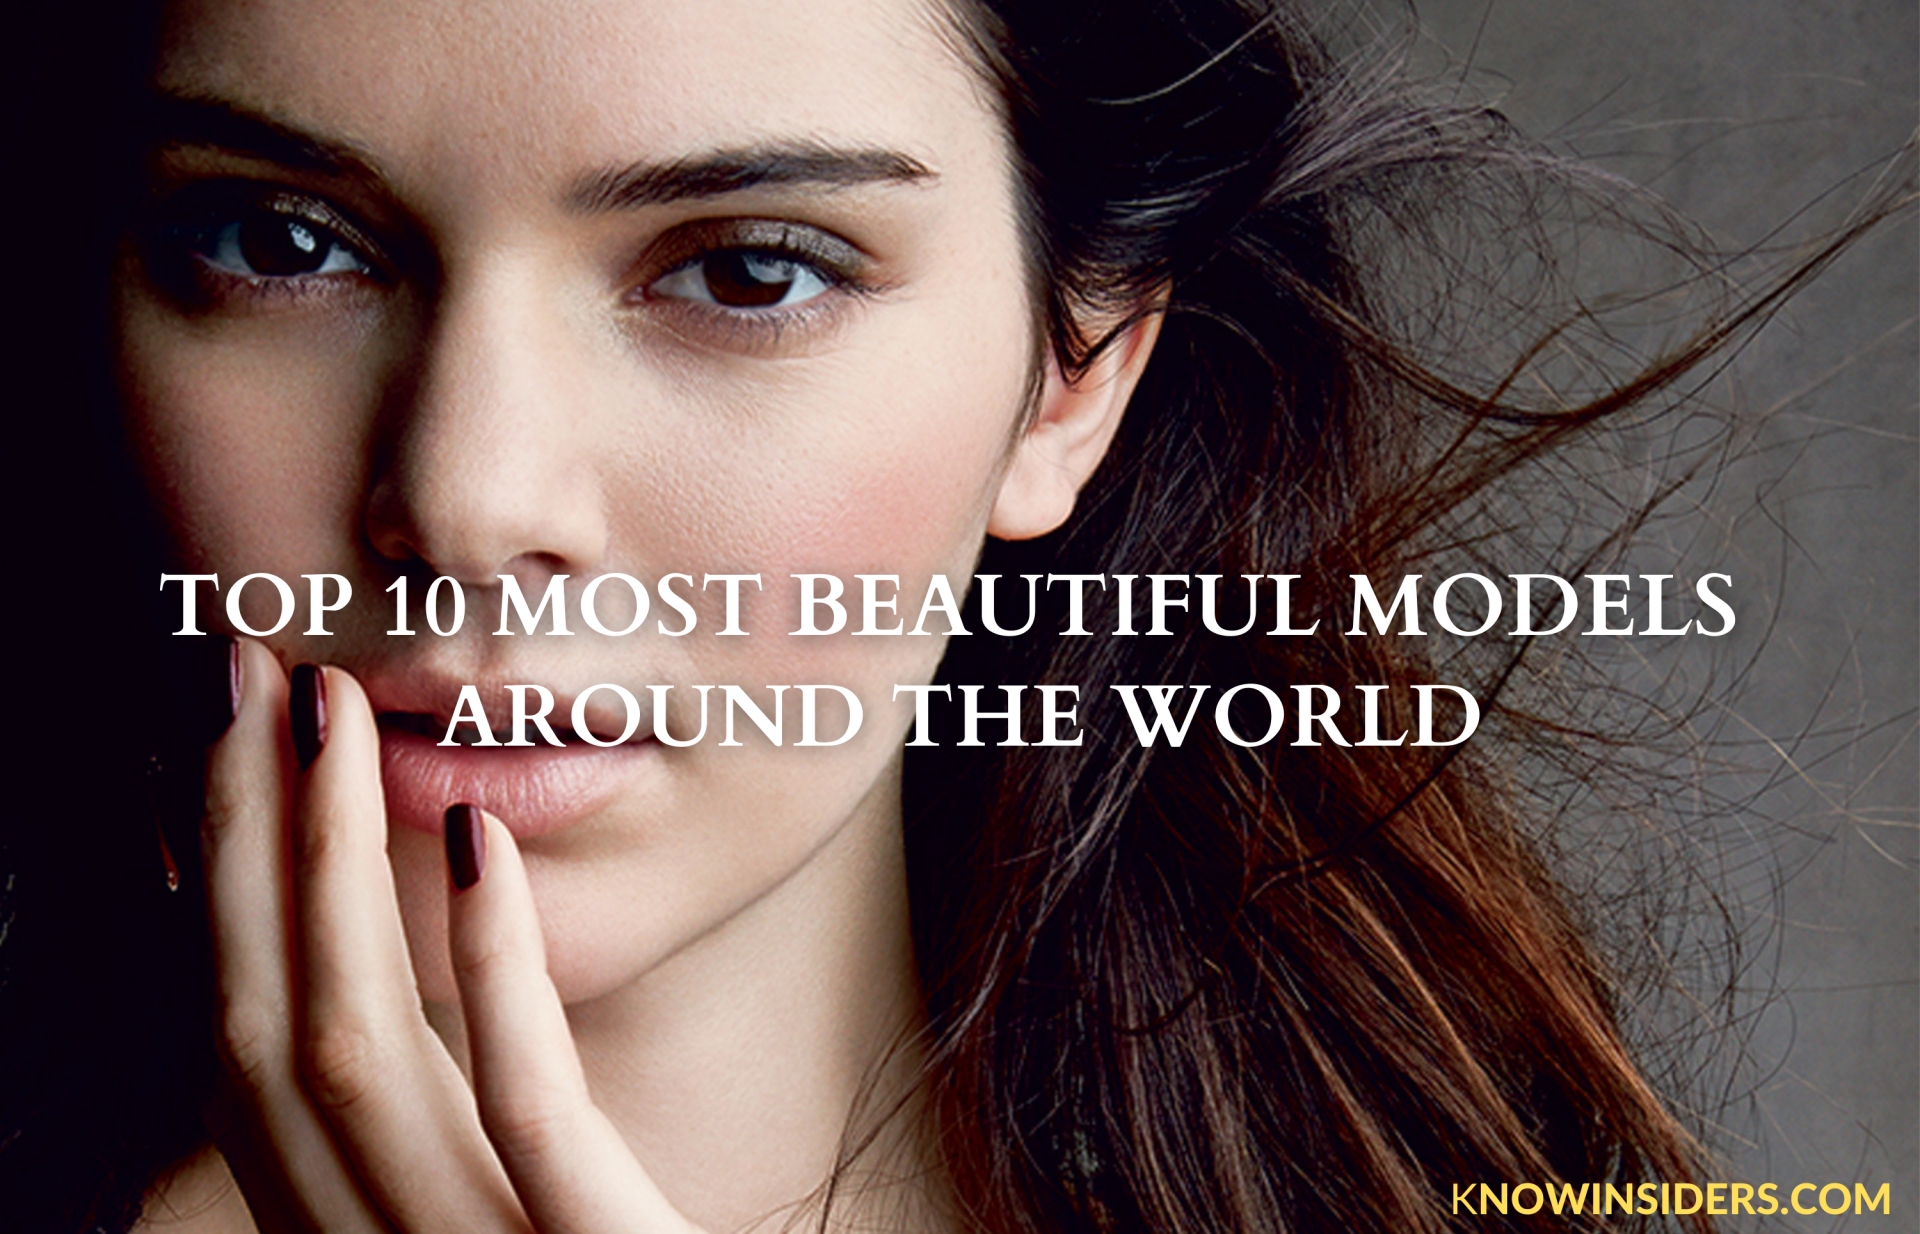 Top 10 Most Beautiful Models in the World